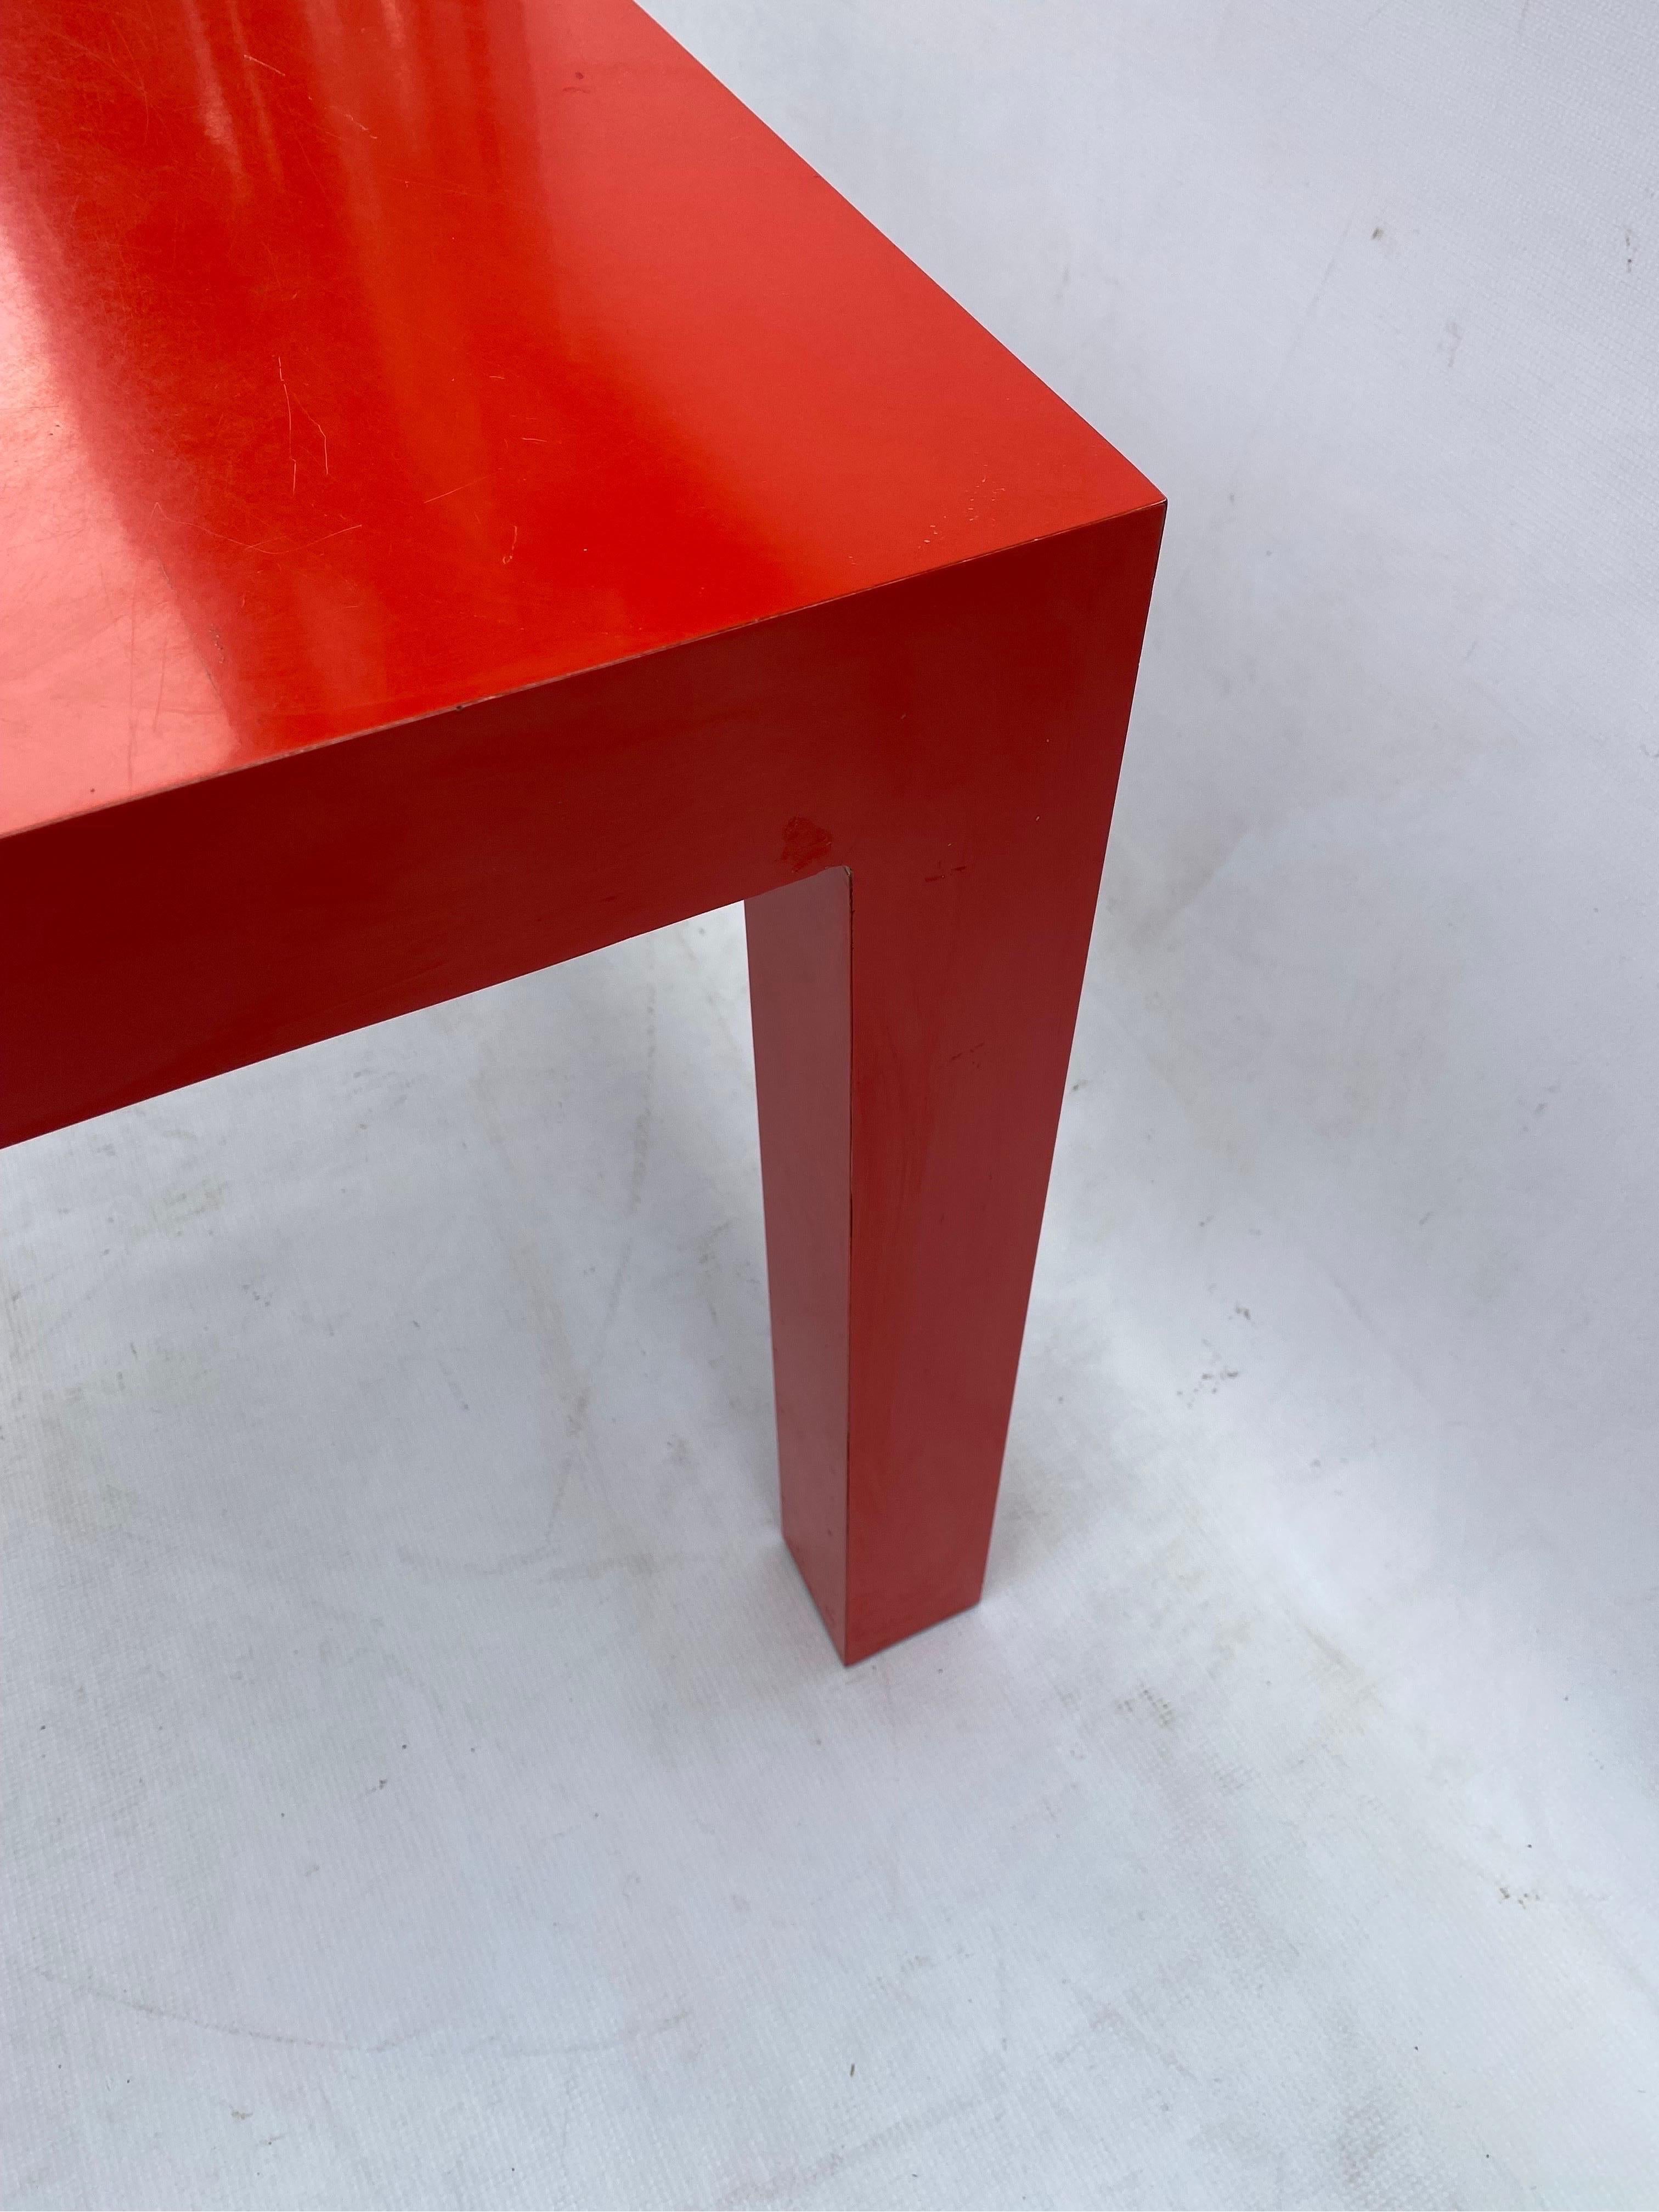 Milo Baughman for Thayer Coggin Formica Red Side Coffee Table 1960s Mid Century  For Sale 6